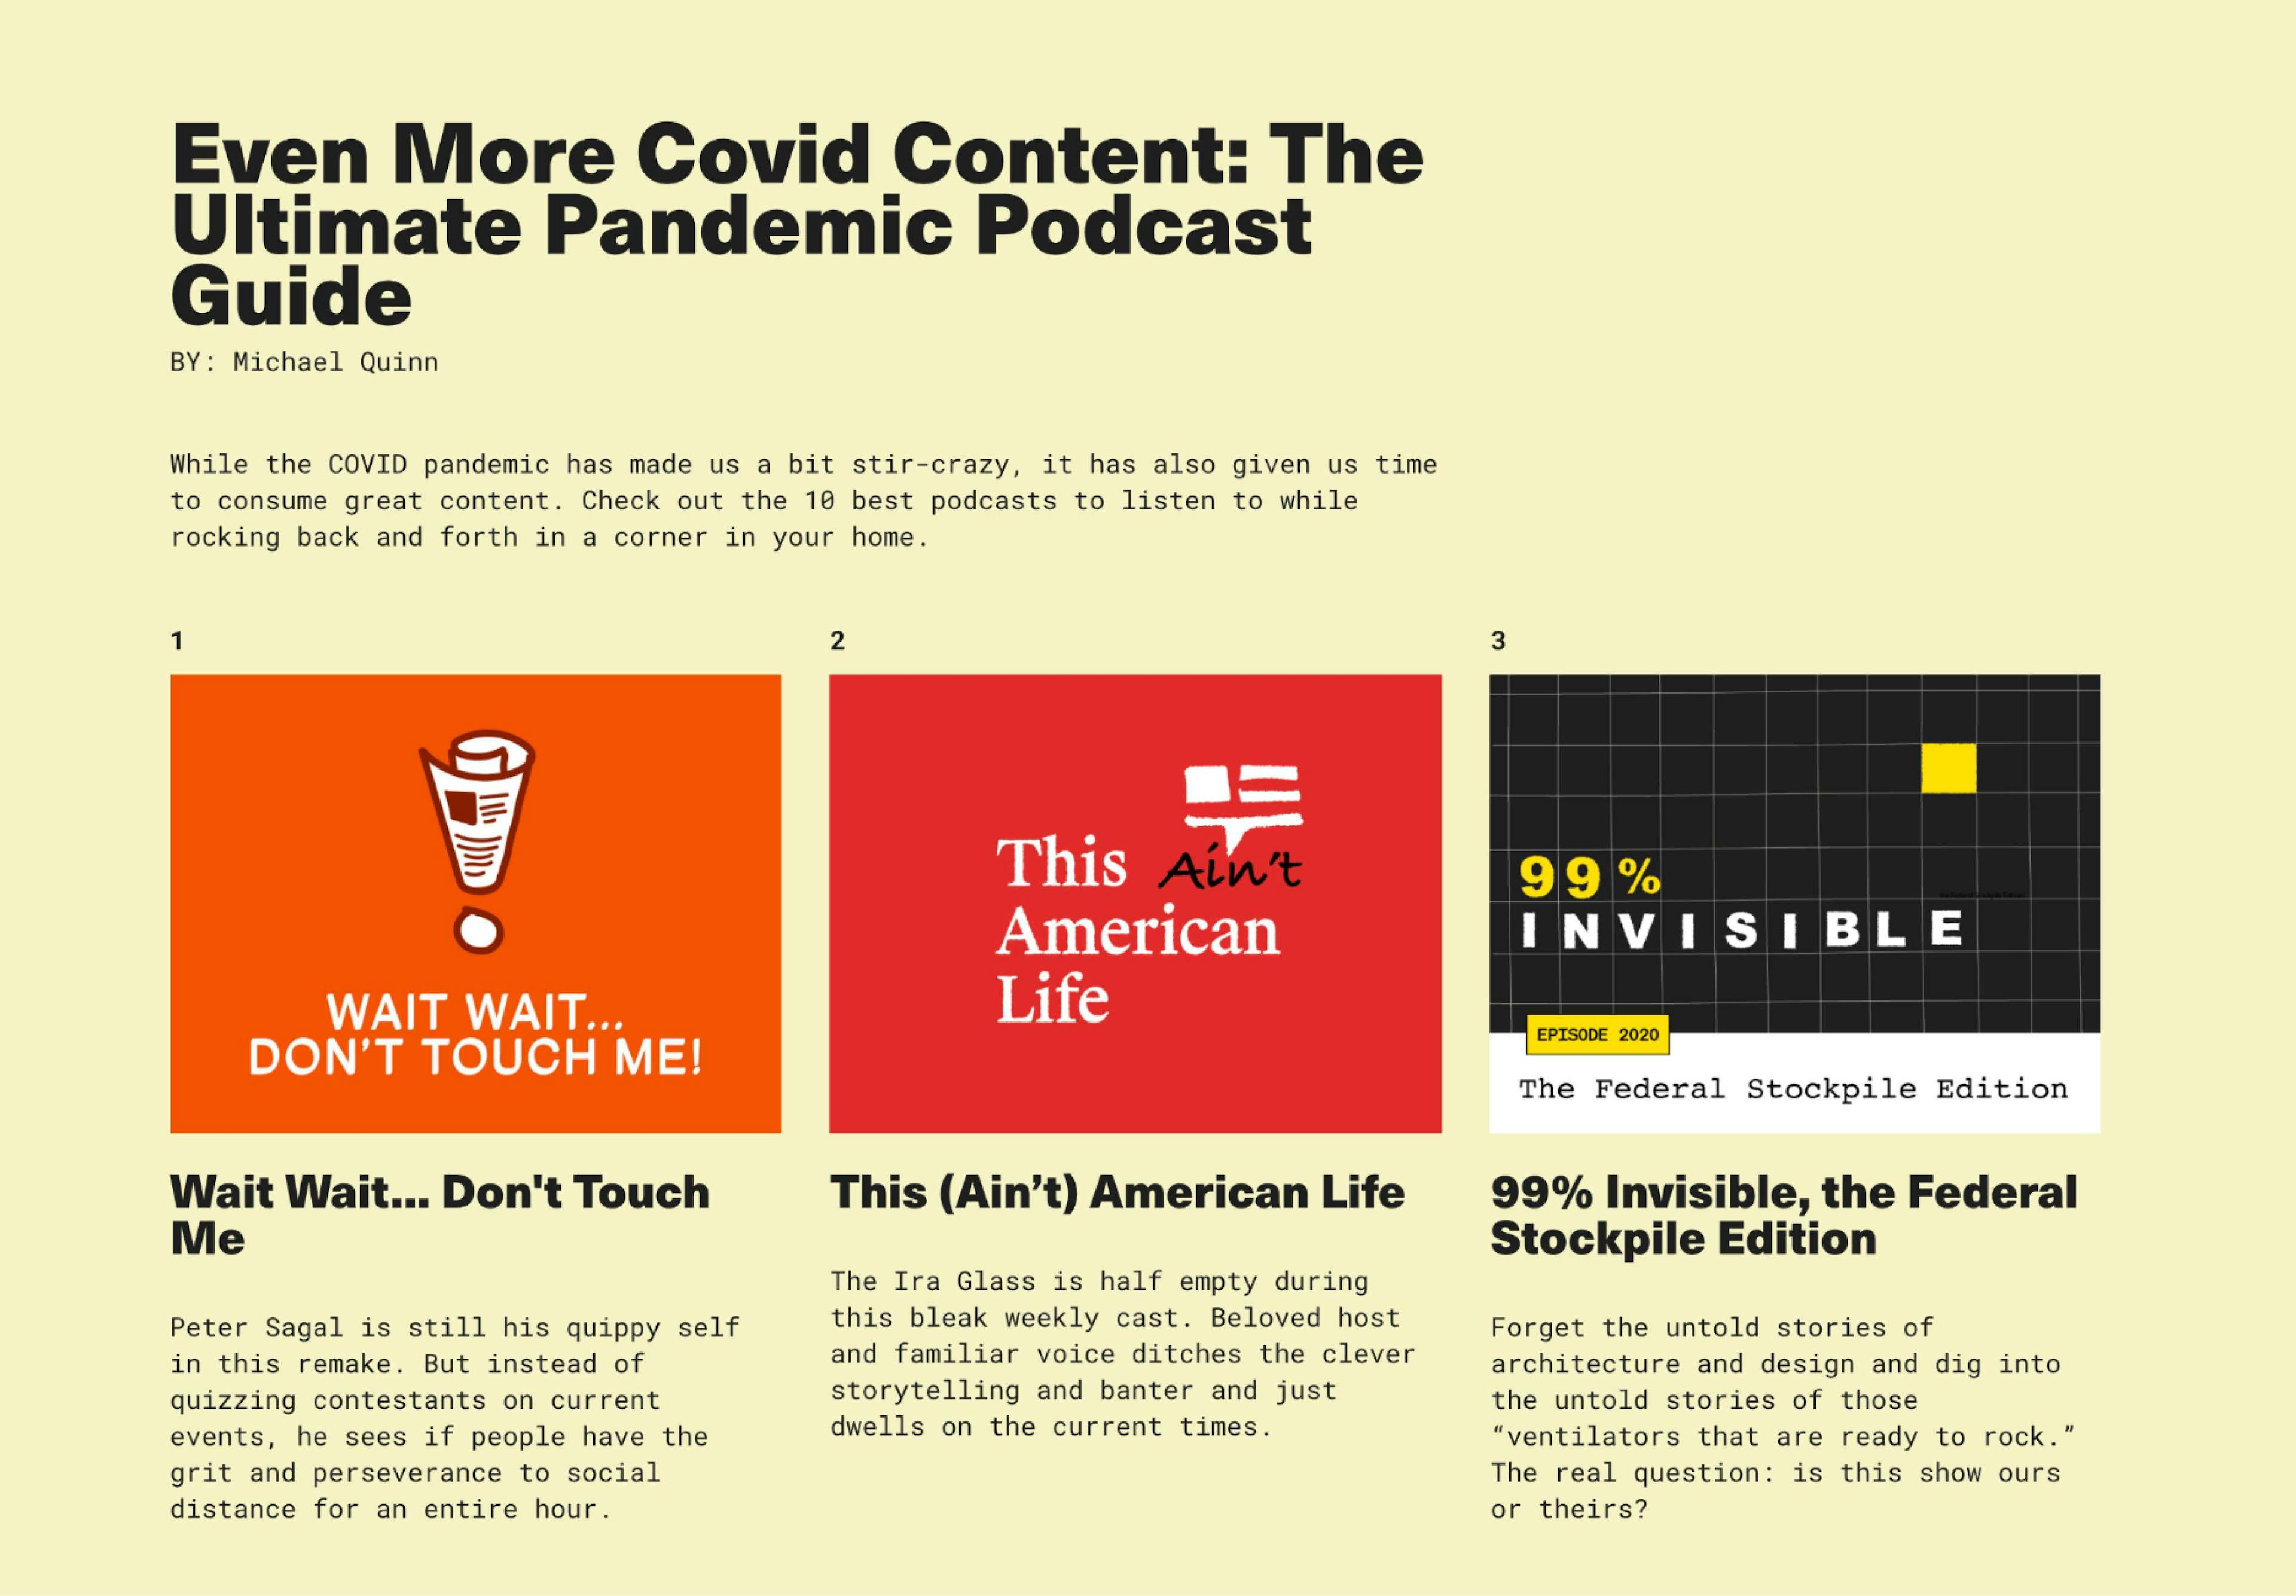 Even more covid content: The ultimate pandemic podcast guide